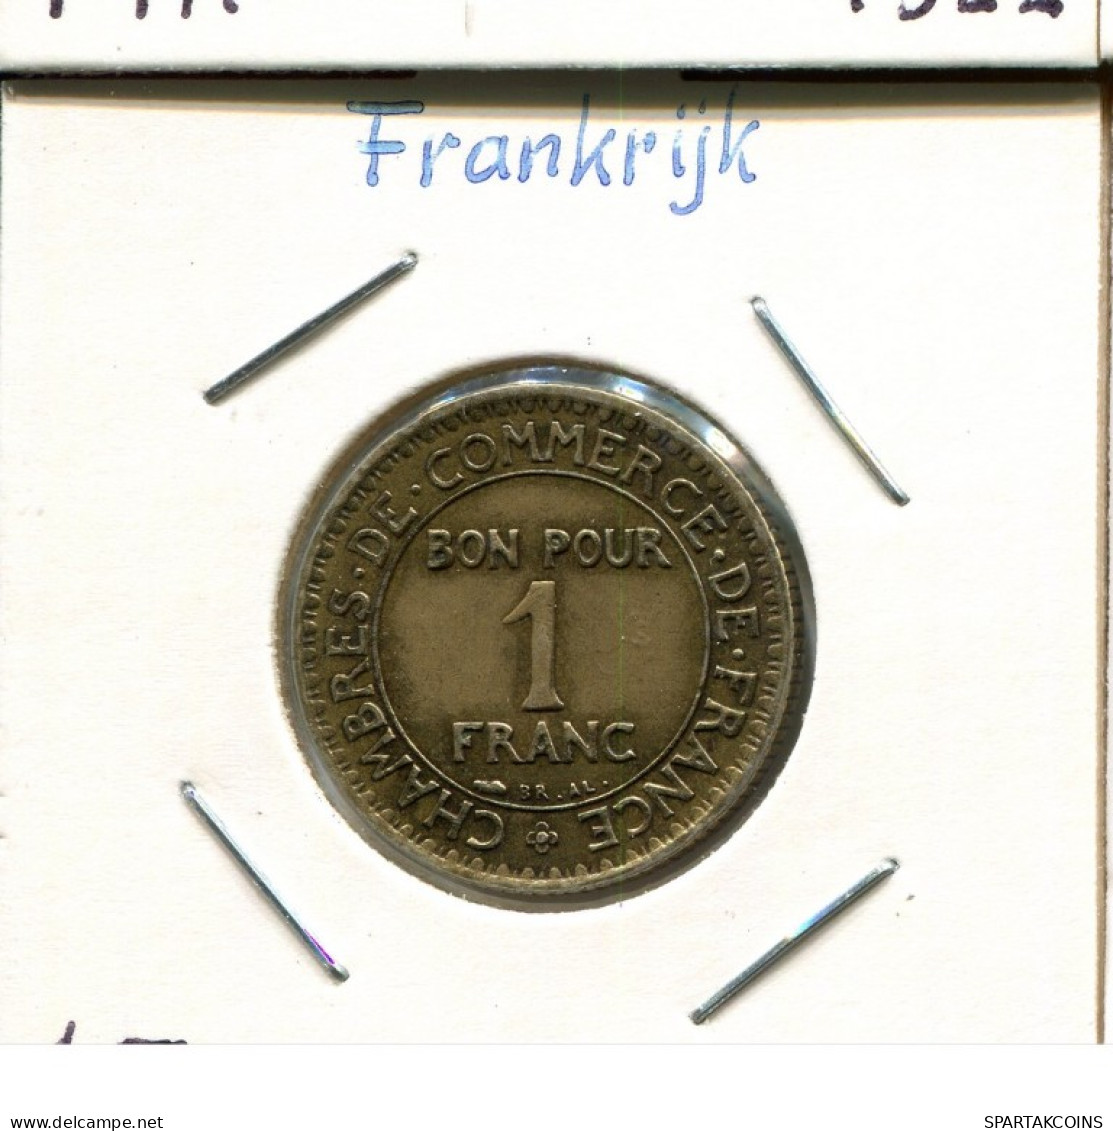 1 FRANC 1923 FRANCE Coin Chambers Of Commerce French Coin #AM269.U.A - 1 Franc